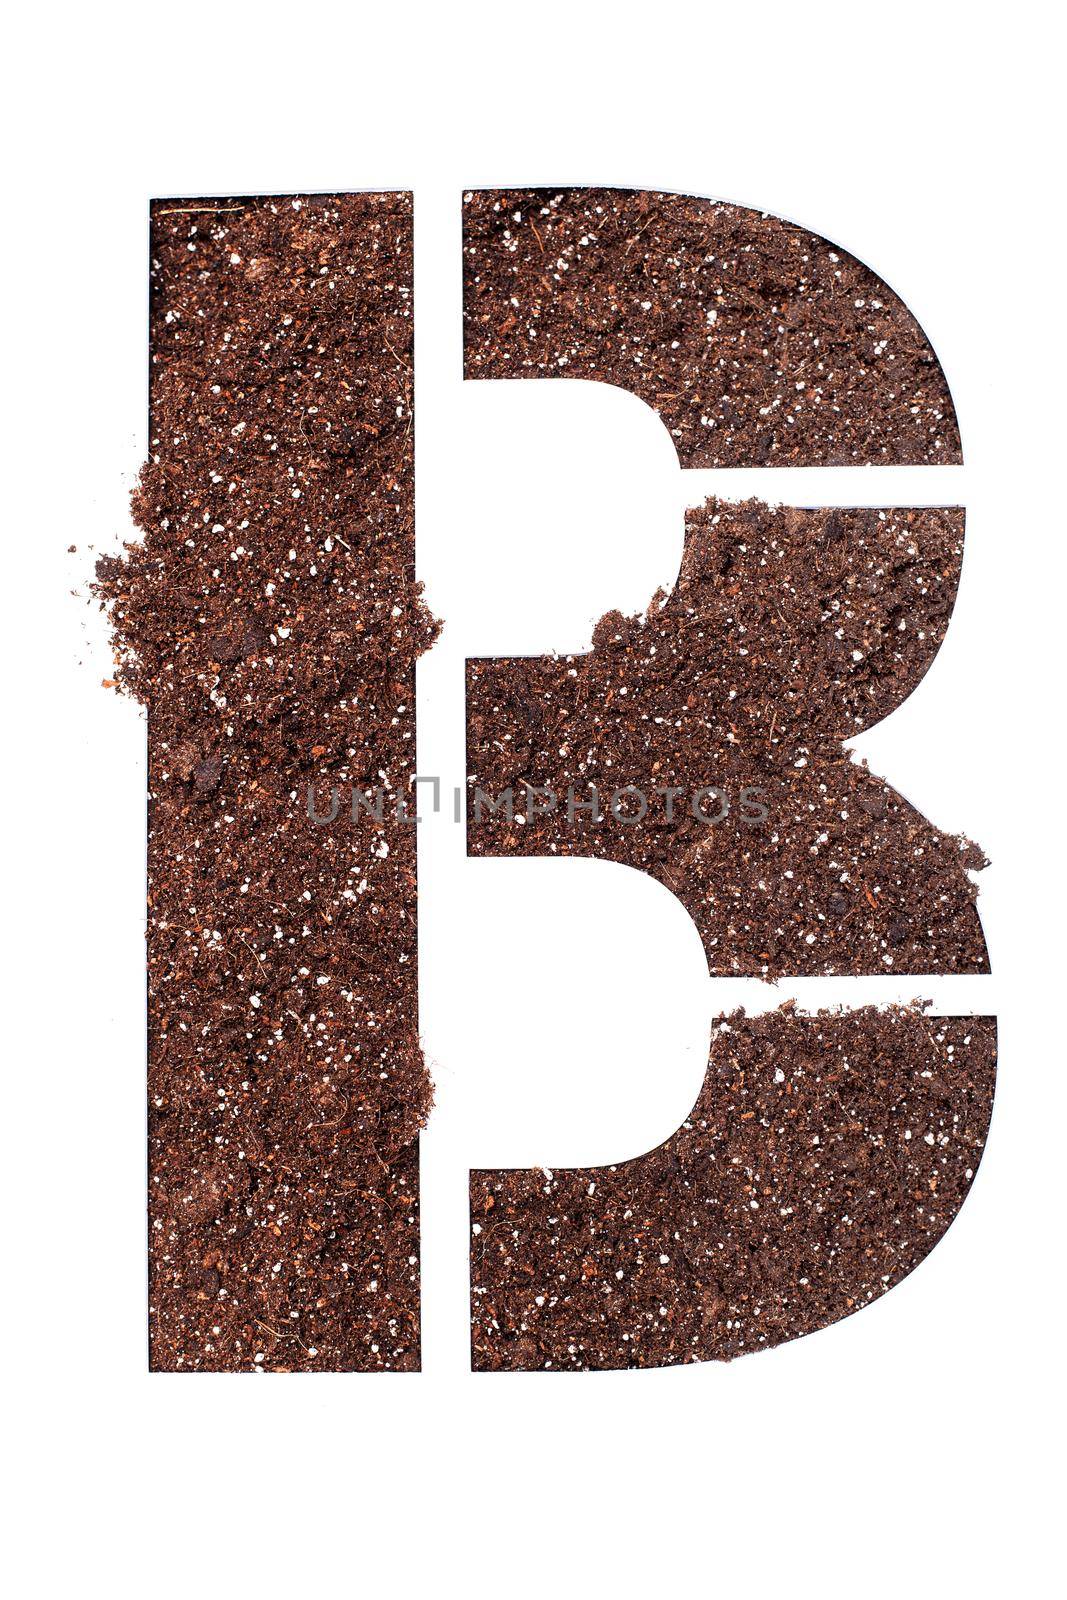 stencil letter B made above dirt on white surface by kokimk